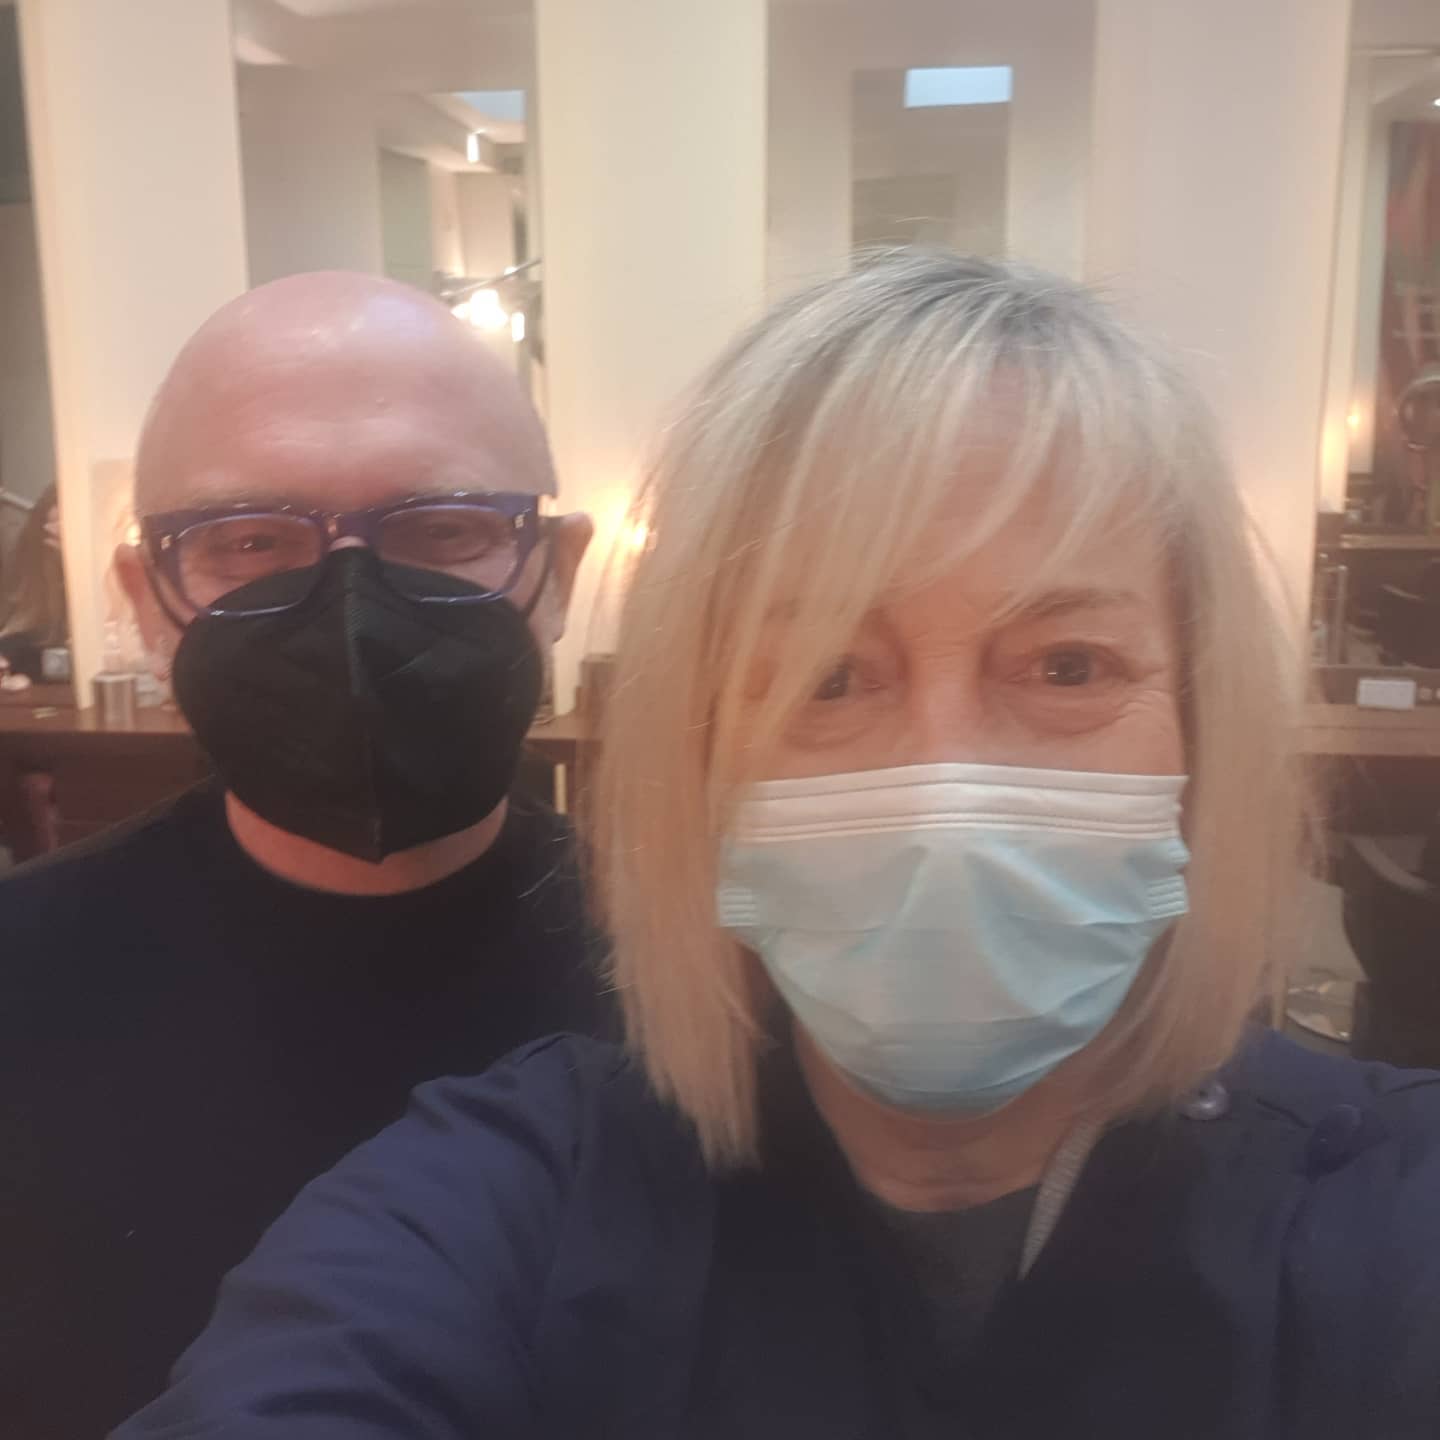 Who is behind the mask? 
.
All gowned and masked up and at last my new 2021 haircut.
.
With the talented @darrenfowlerhair London whom I recommend all my 1-2-1 personal makeover and clients to go to. 
He's great with all sorts of hair - fine, thin, curly, thick etc and also understanding the needs of the very diverse clients I send him.
.
.
.